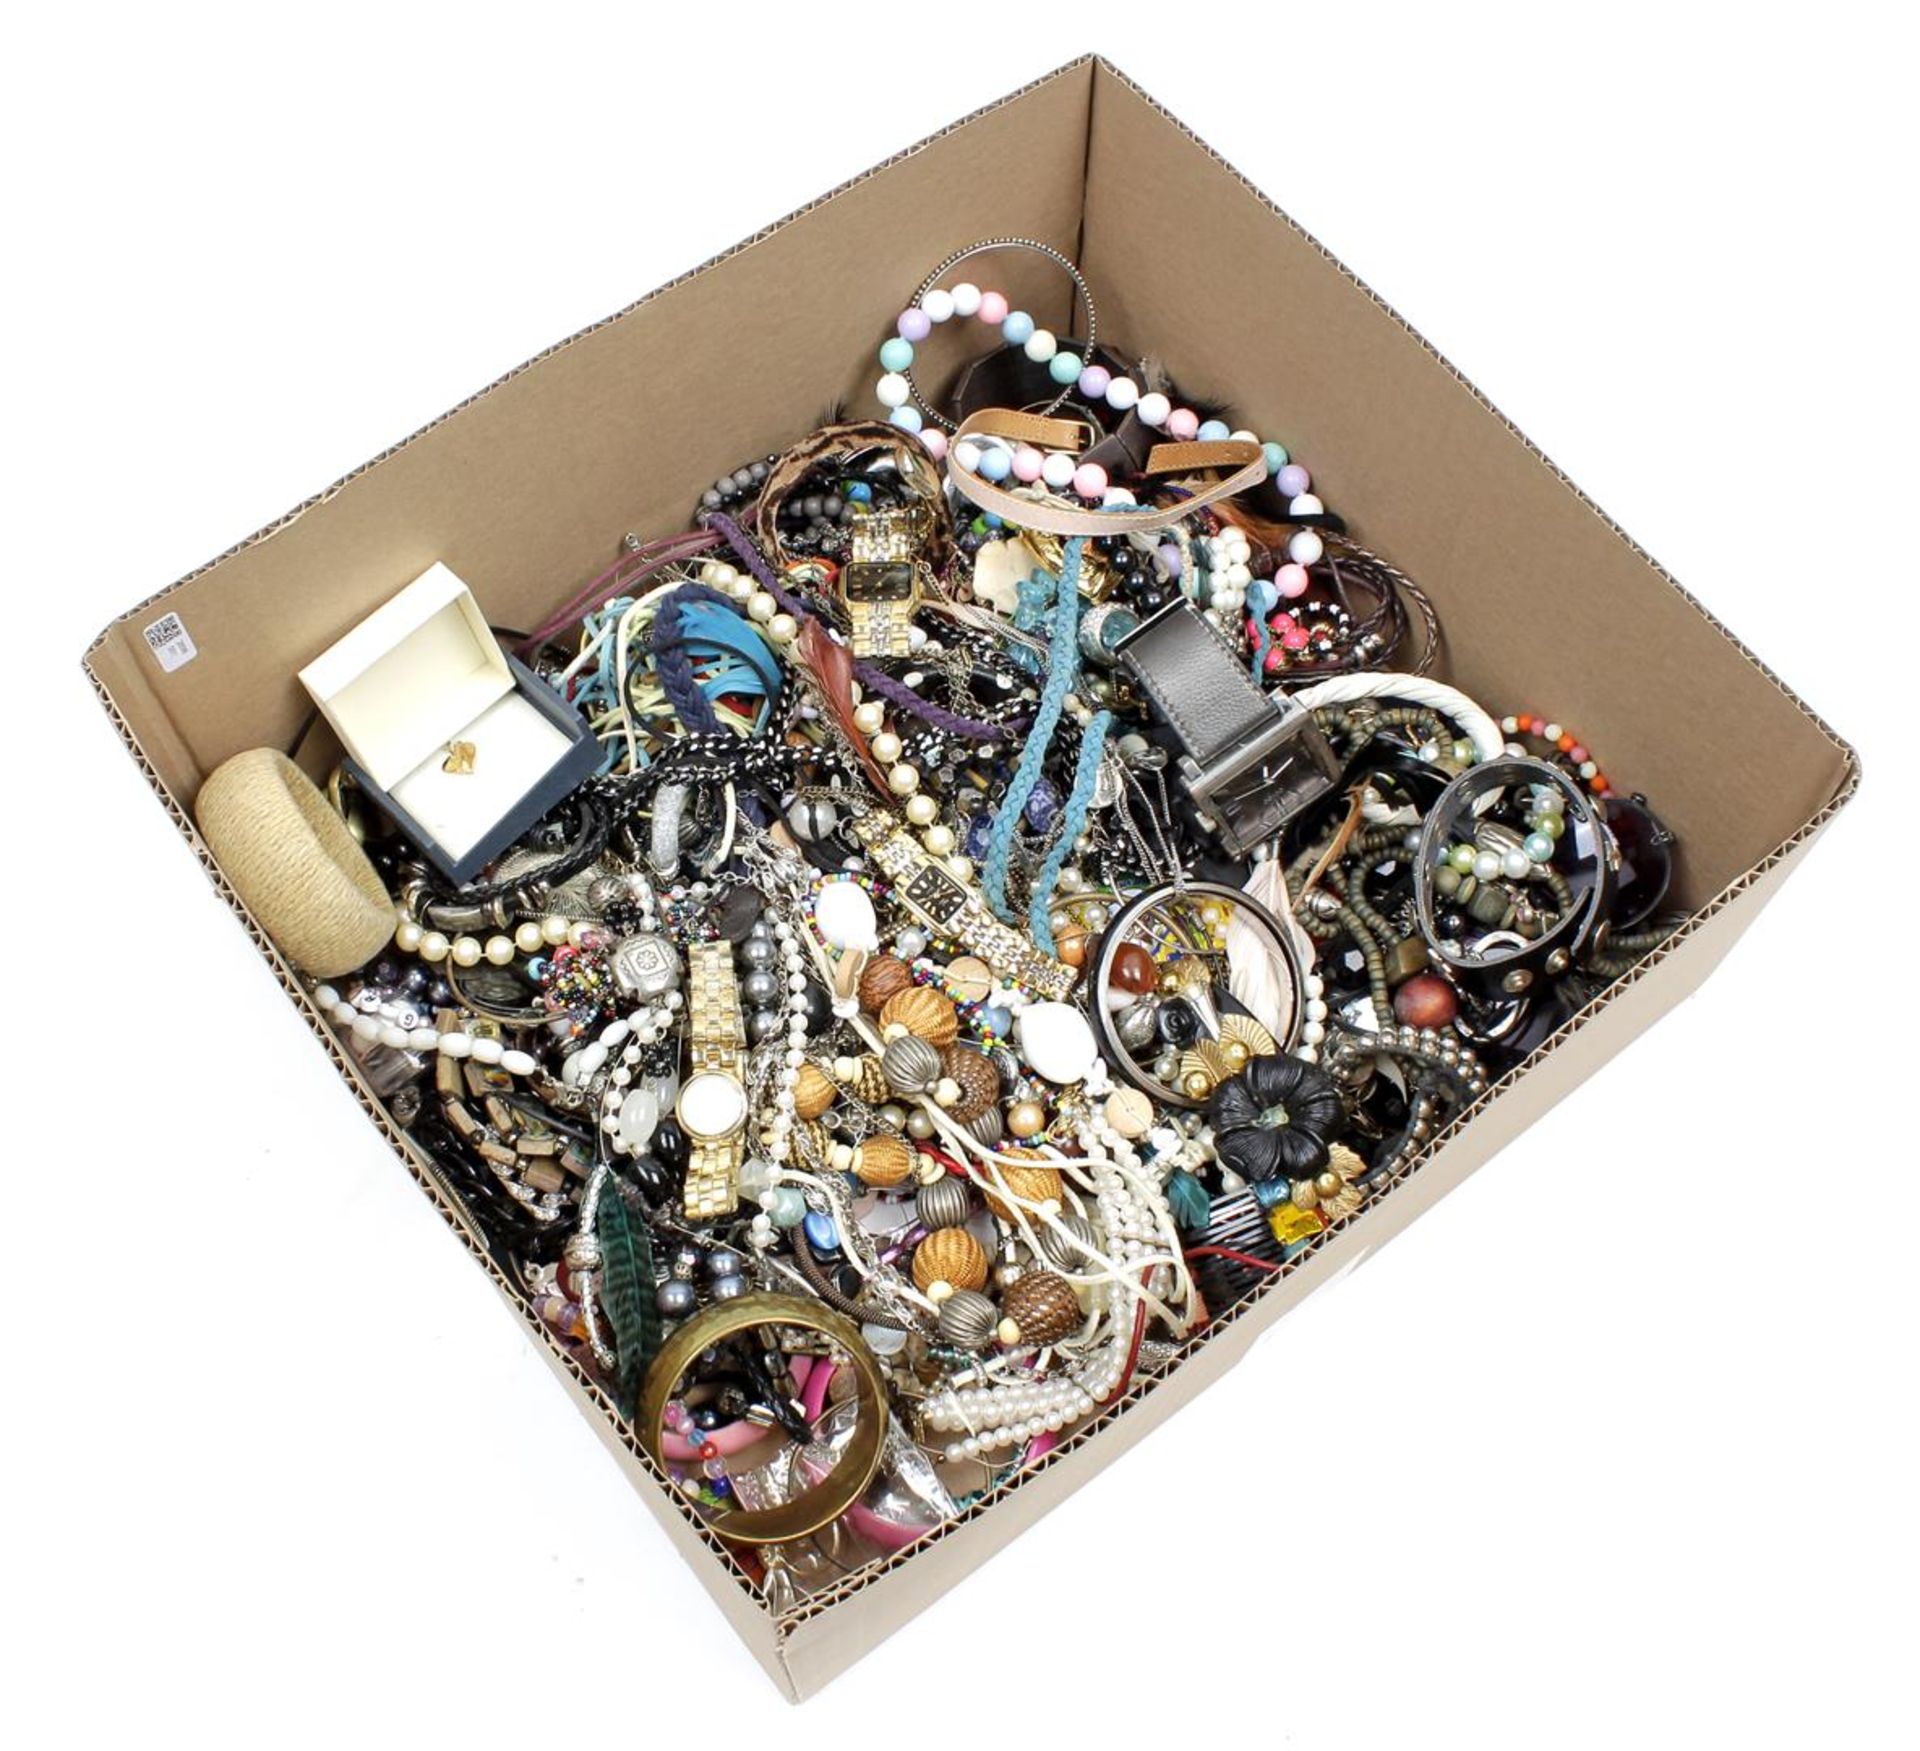 Box full of bijou, including necklaces, earrings, etc.